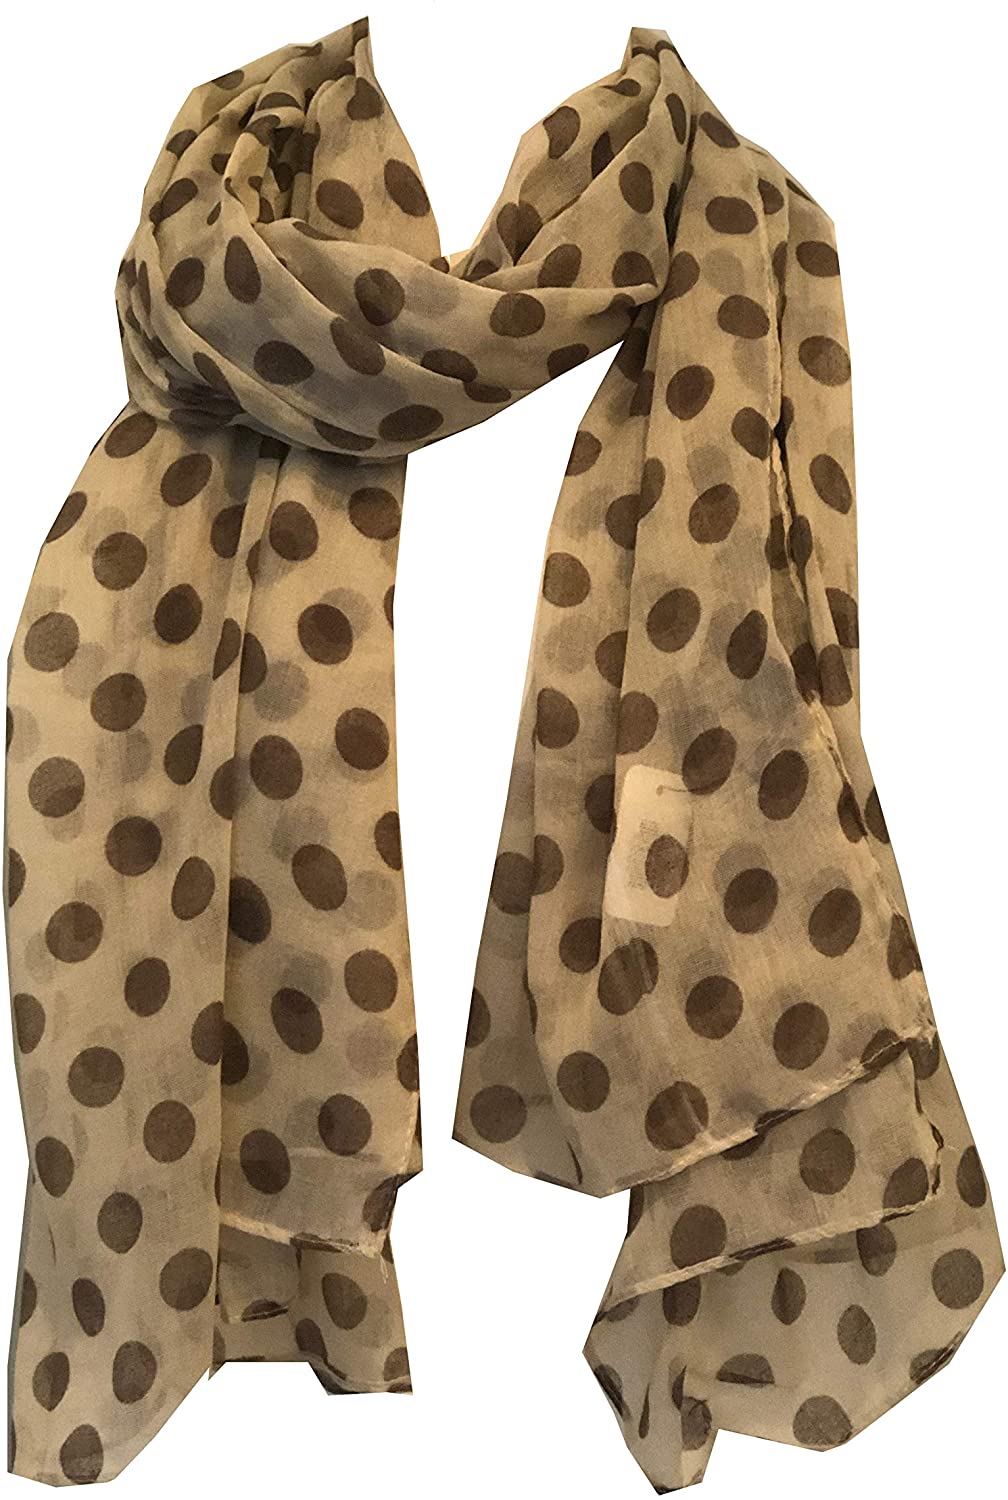 Pamper Yourself Now Beige with Brown Big spot Scarf/wrap